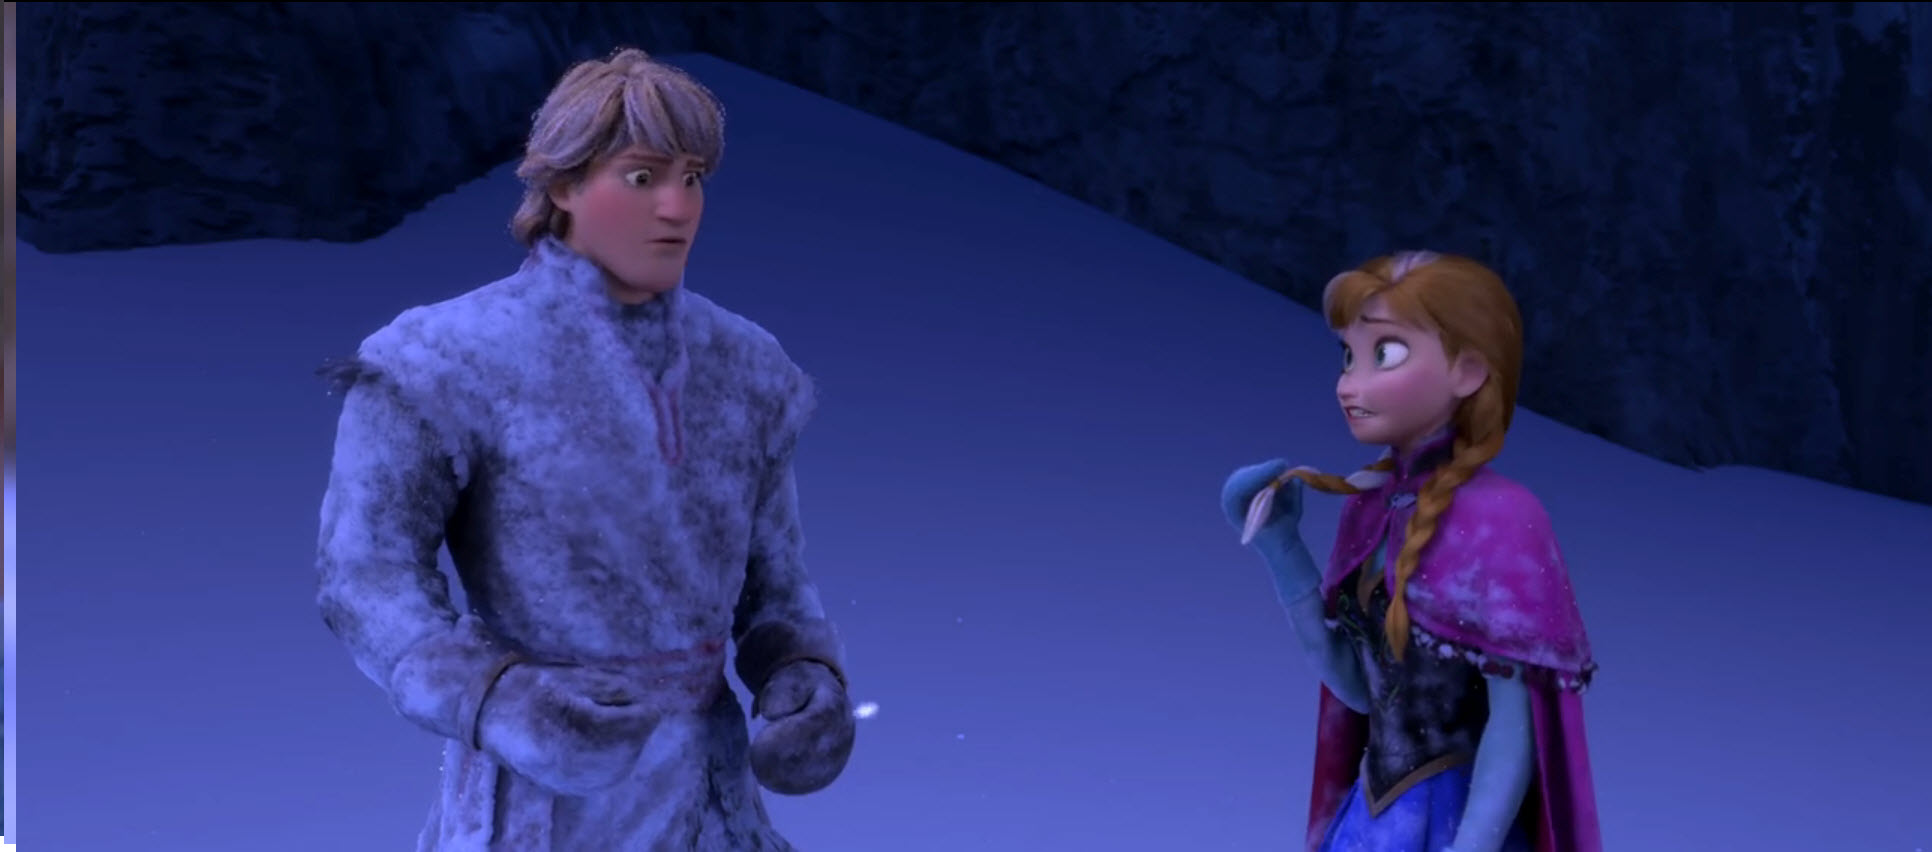 Anna Talking About Han’s Foot Size in Frozen